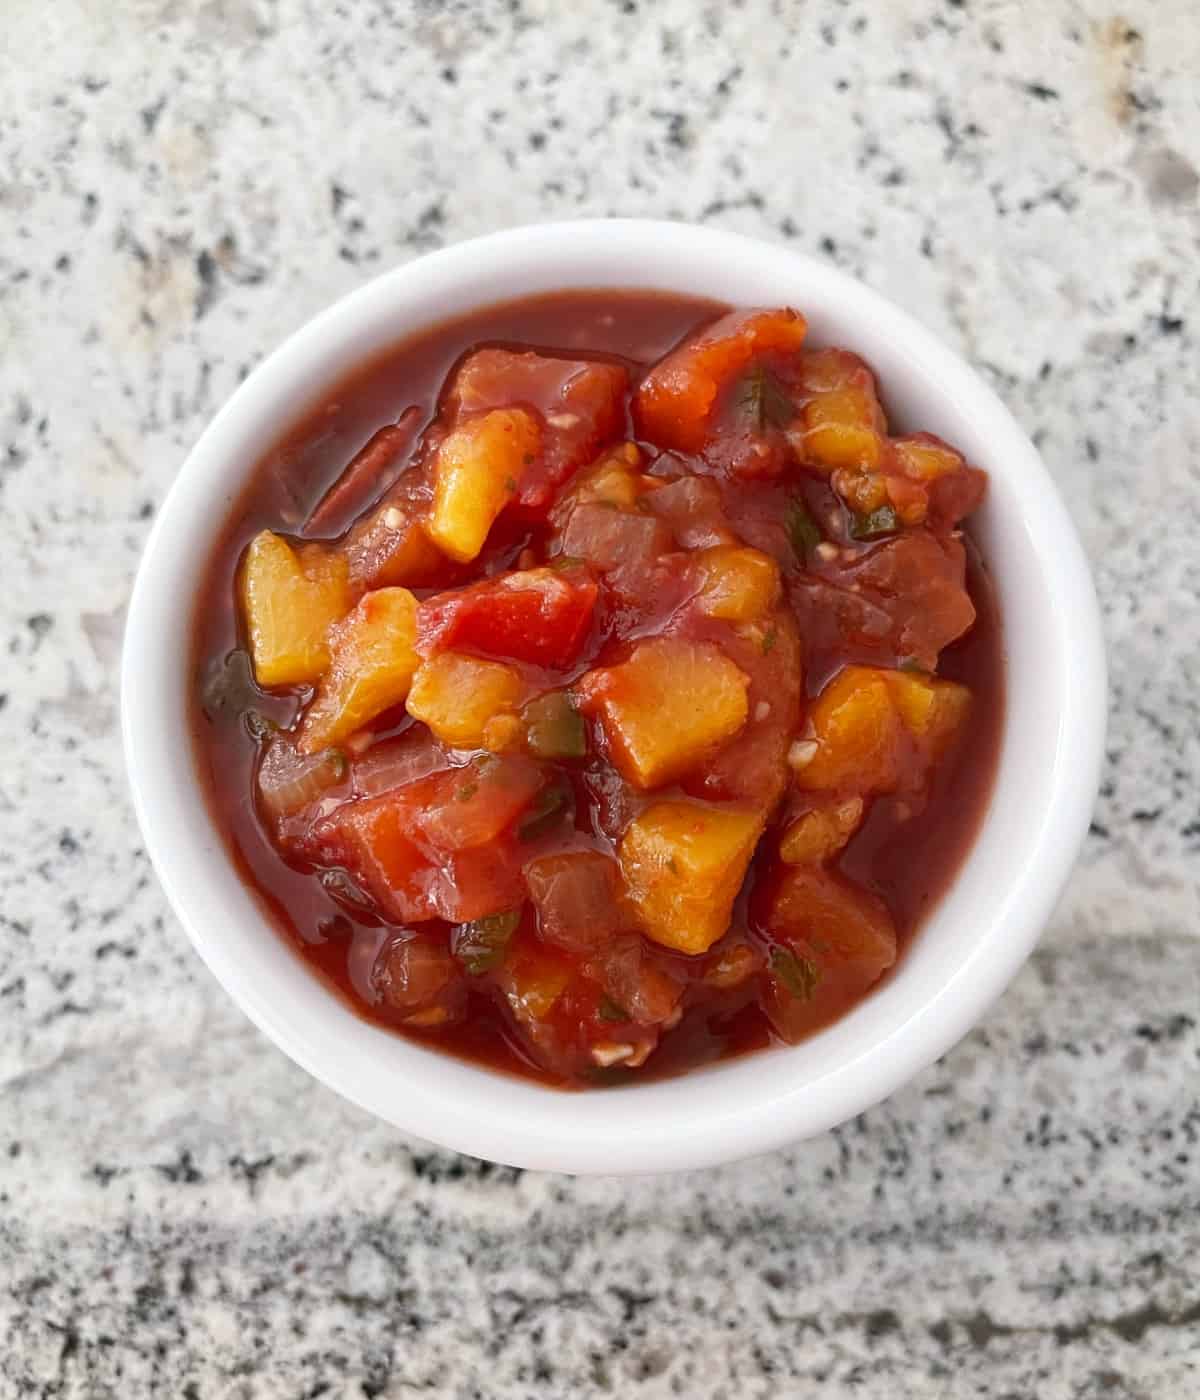 Slow cooked fresh peach salsa in small white bowl on granite.